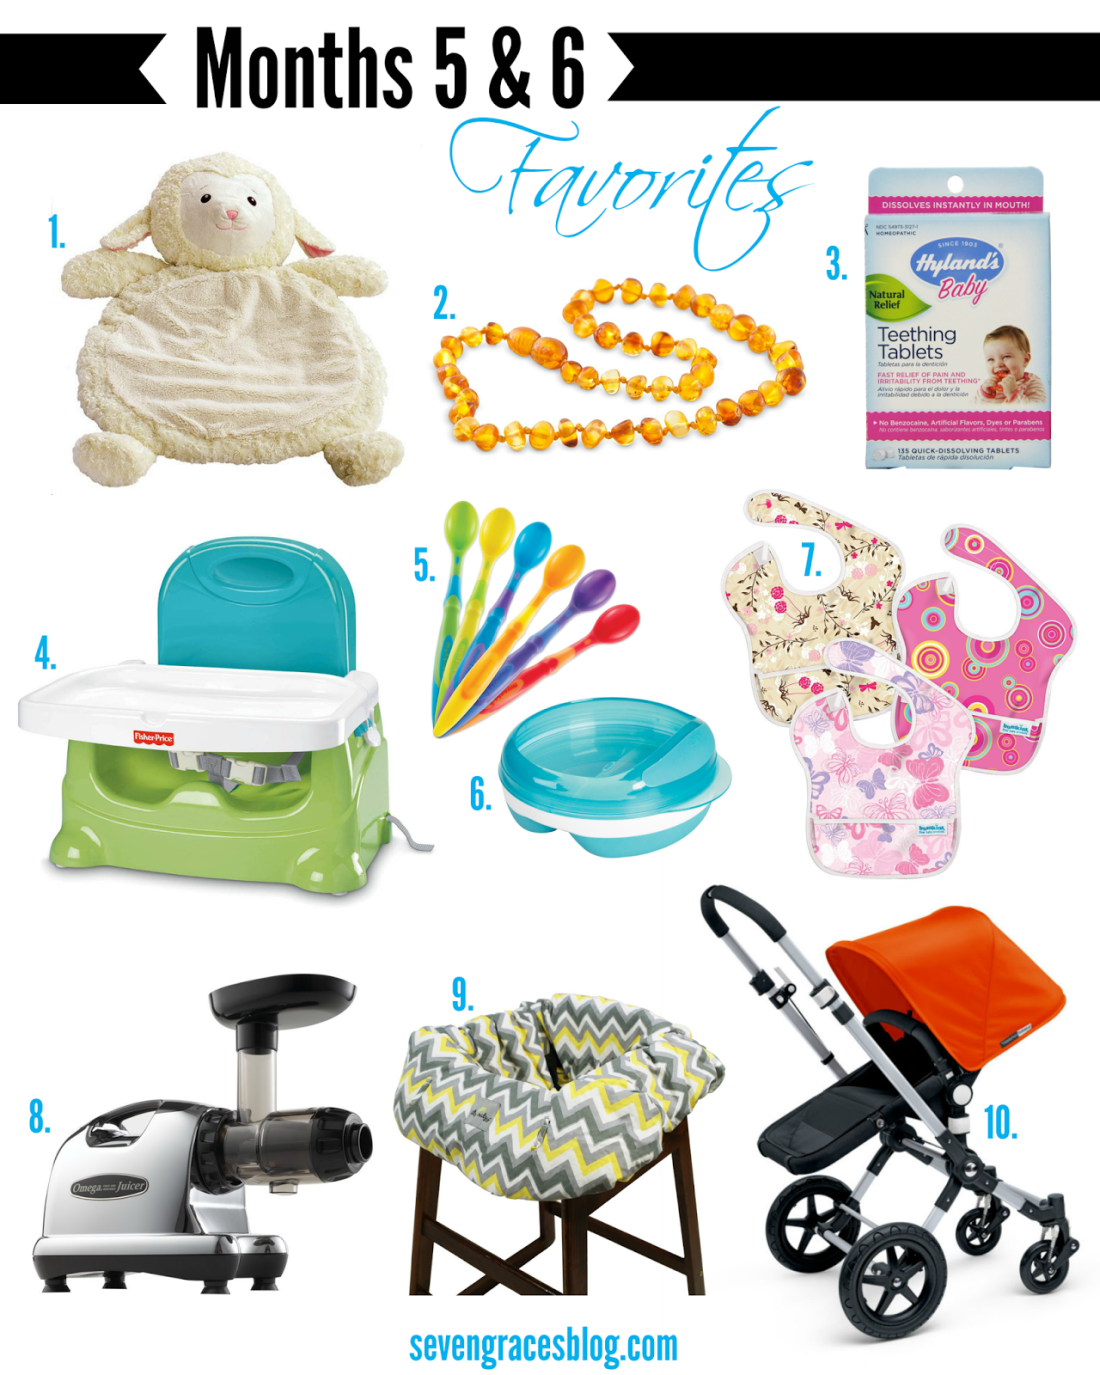 Top 10 Baby Items for Months 5 & 6: Teething & Feeding - Seven Graces